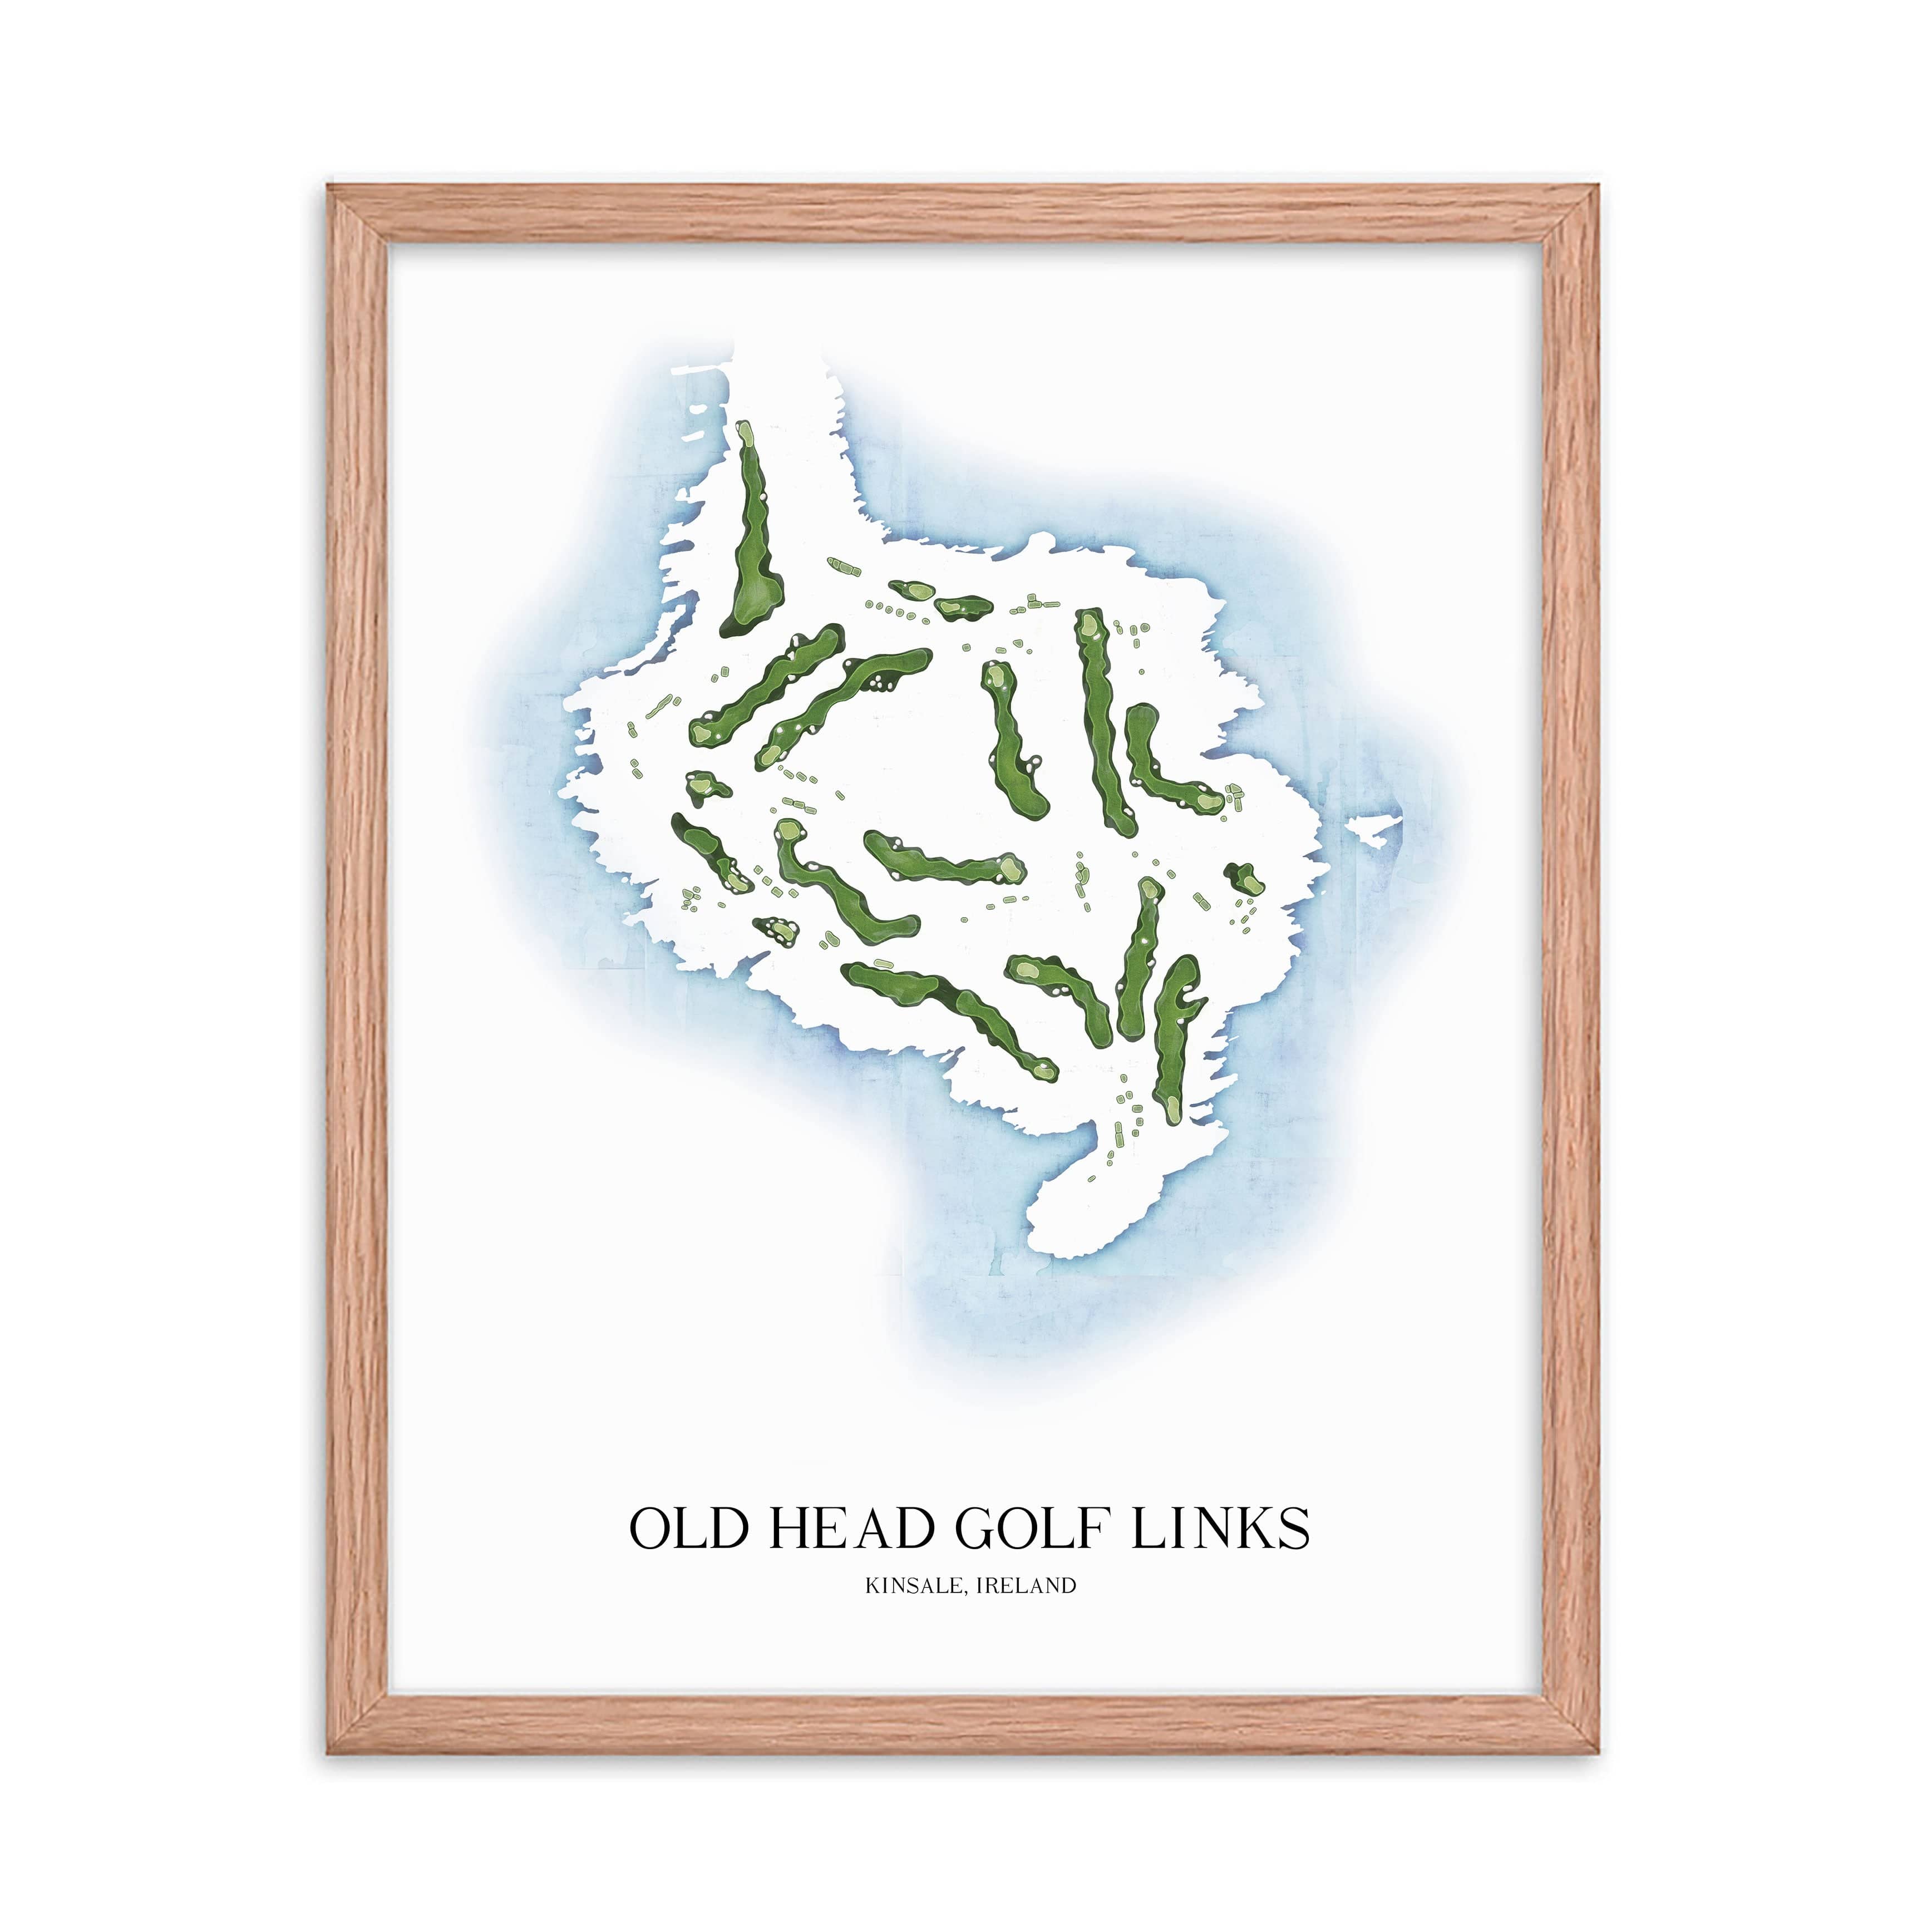 The 19th Hole Golf Shop - Golf Course Prints -  Old Head Golf Links Golf Course Map